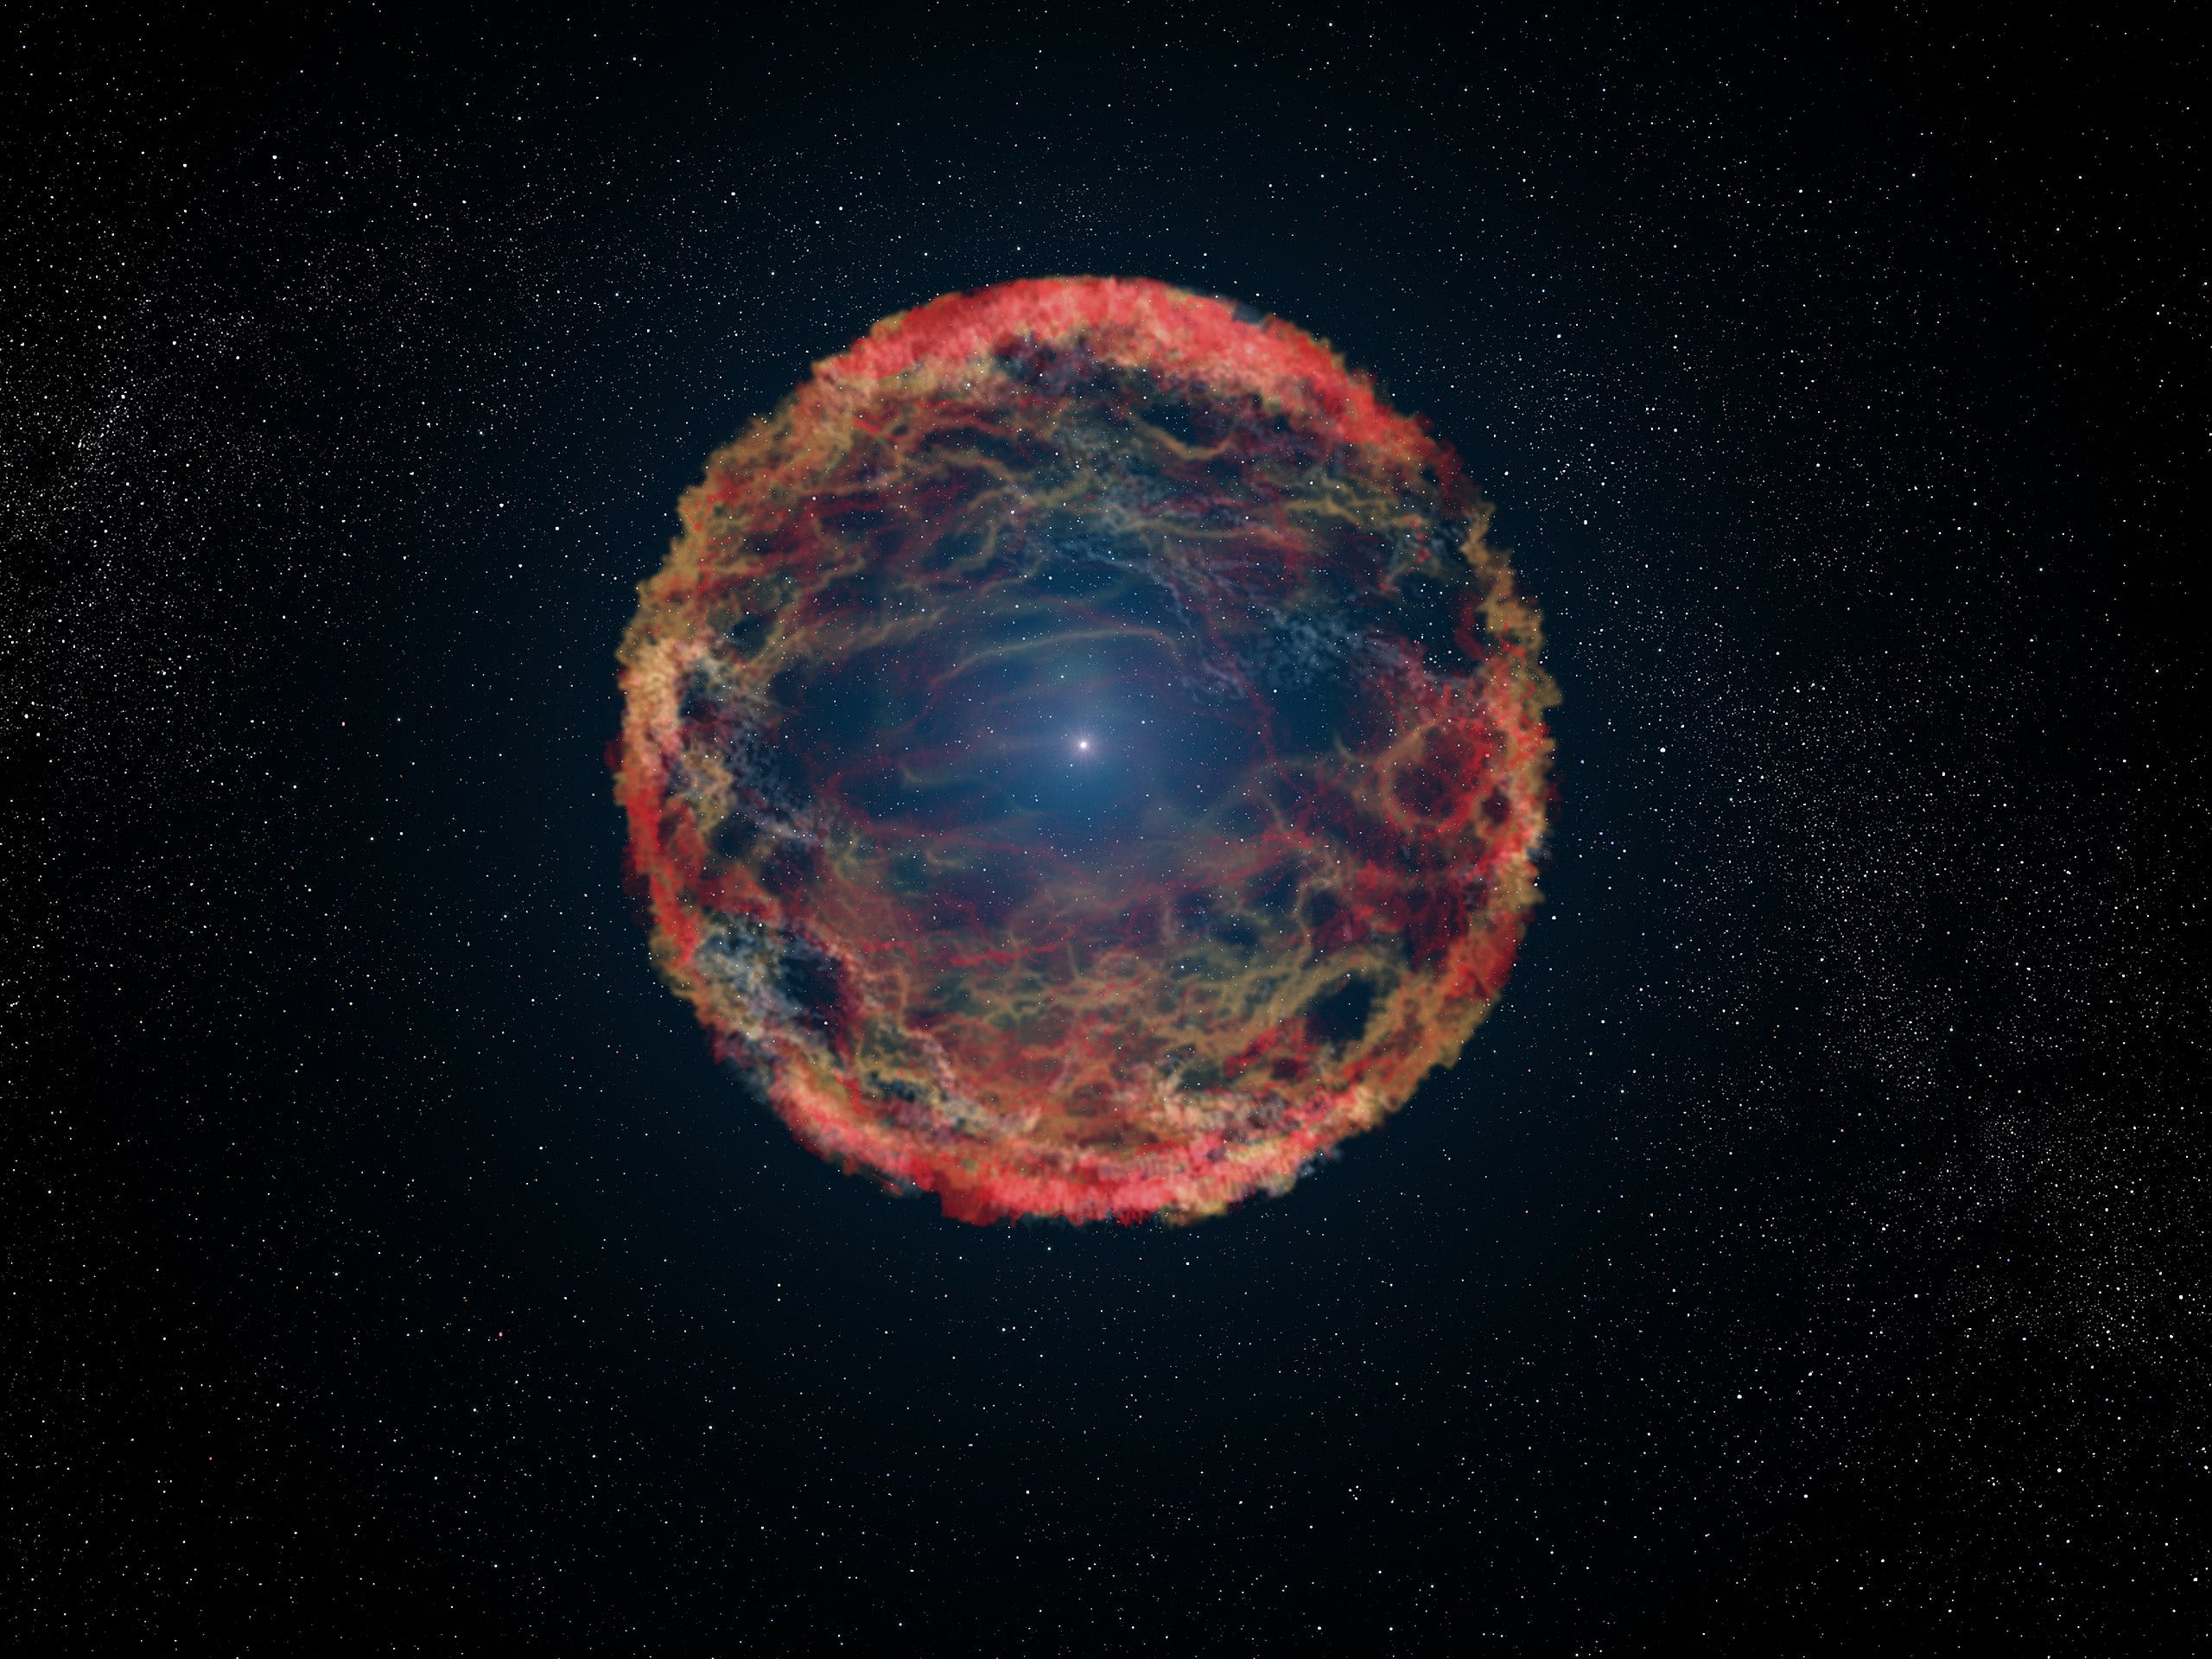 A supernova explosion is a cosmic catastrophe on a huge scale. But it